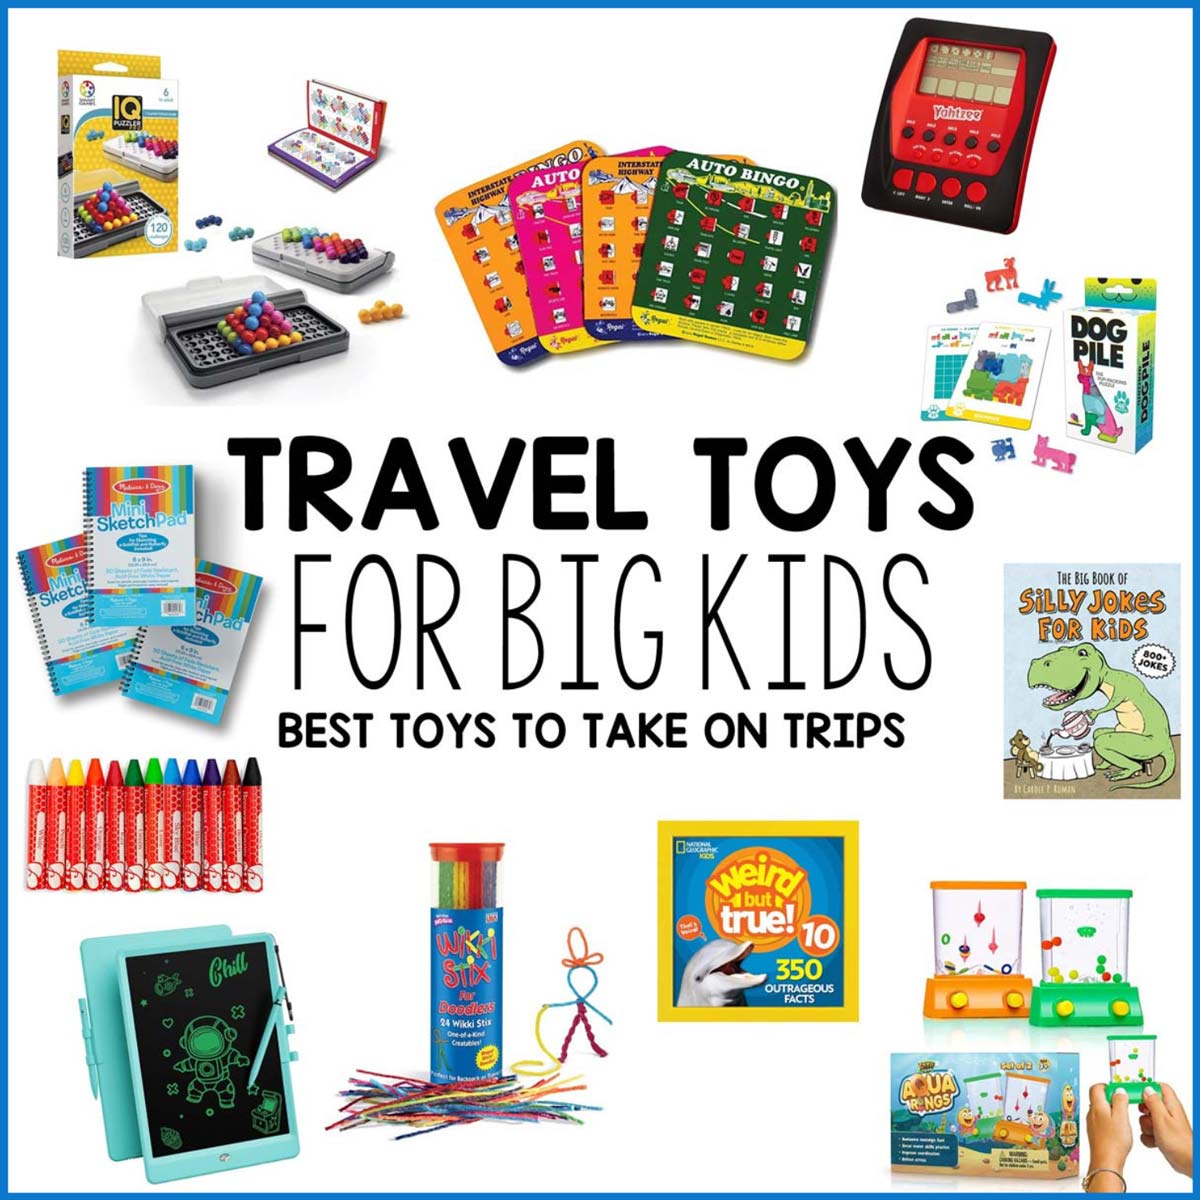 Travel Toys for Big Kids (Best toys to take on trips): image shows toys for kids